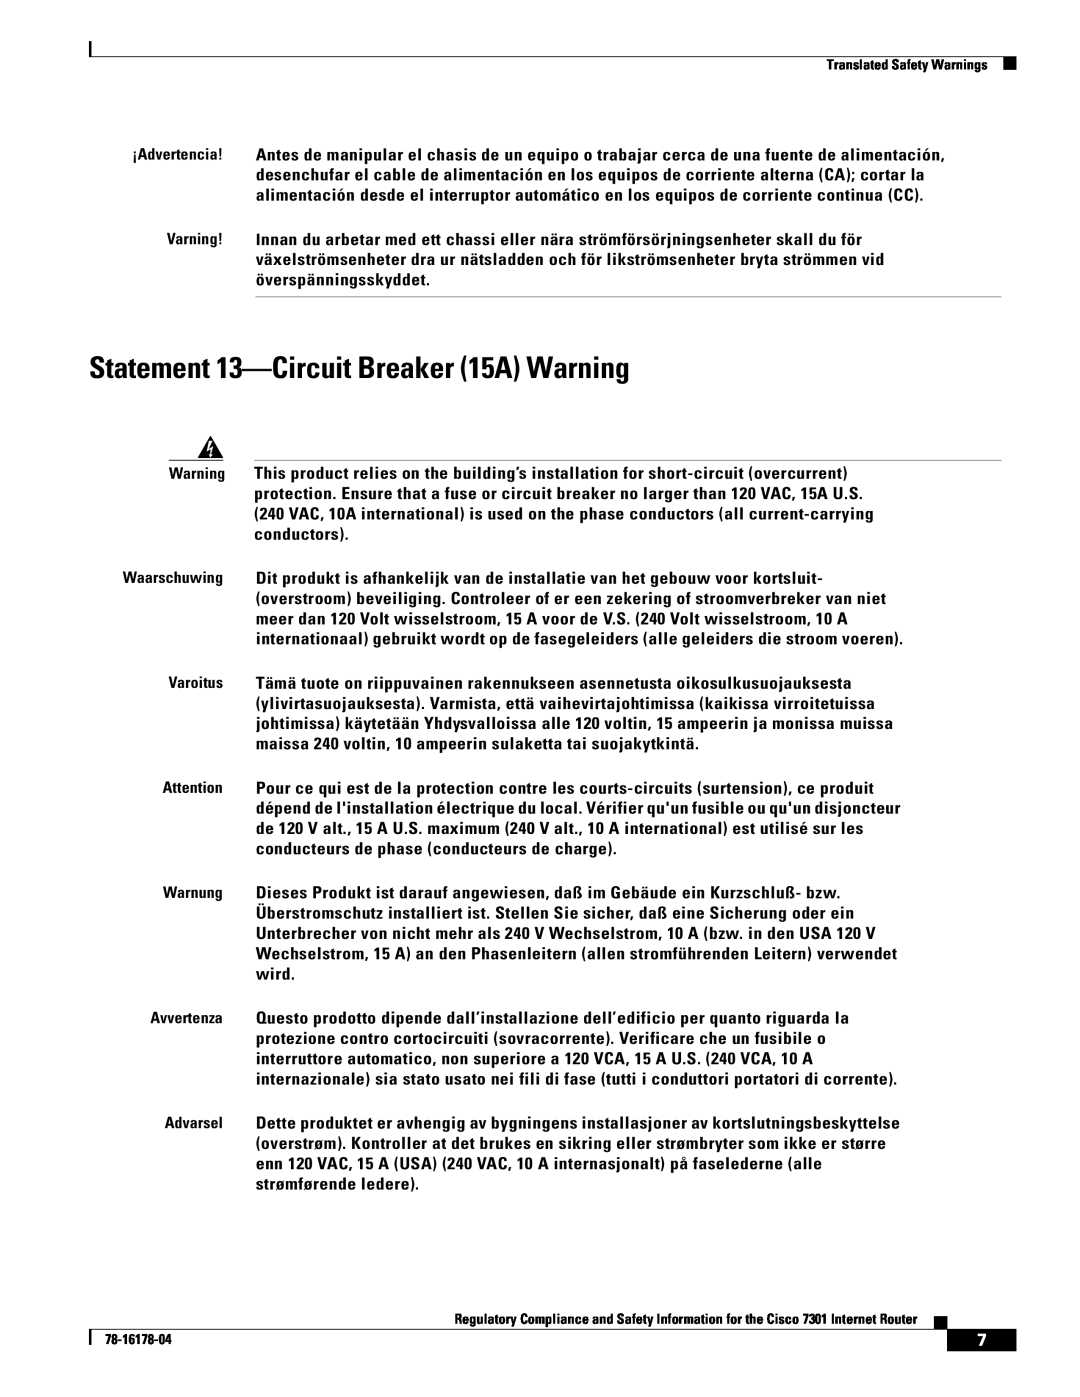 Cisco Systems CISCO7301 manual Statement 13-Circuit Breaker 15A Warning 